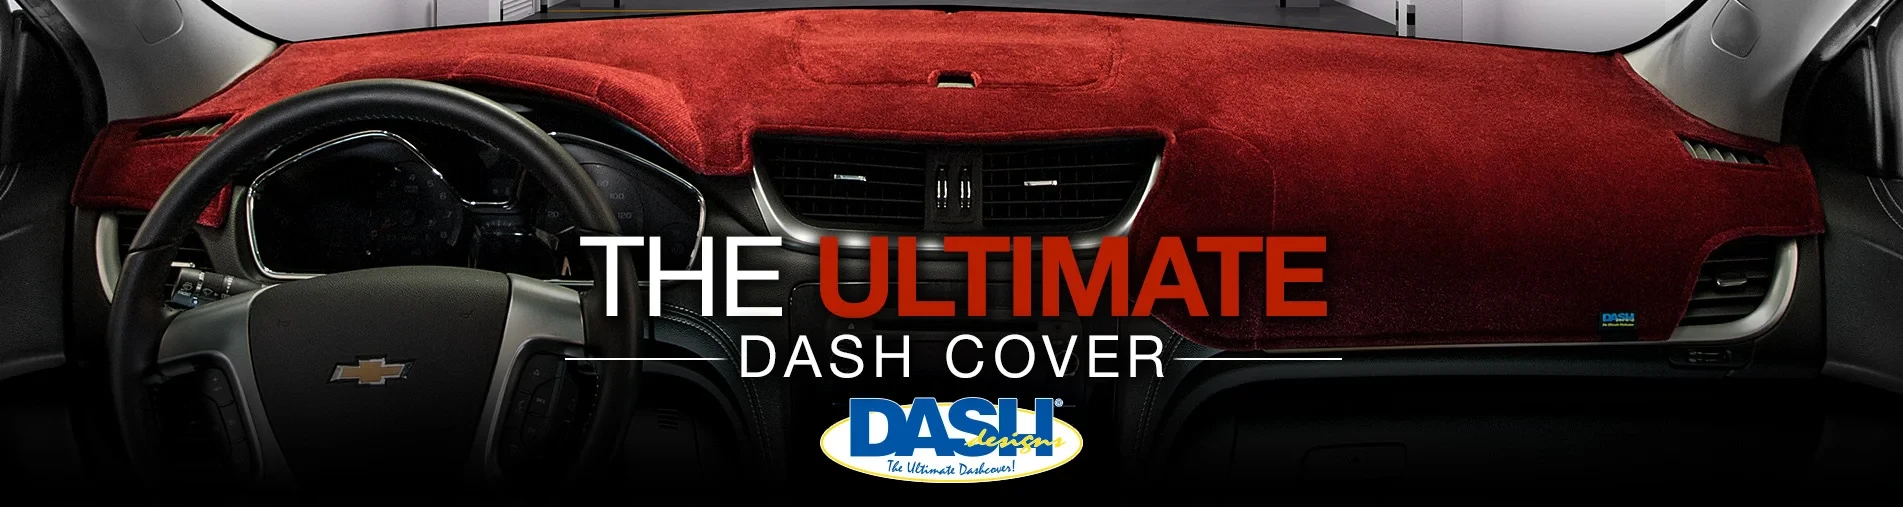 Dashboard Covers, Dash Covers, Car Seat Covers, Car Floor Mats